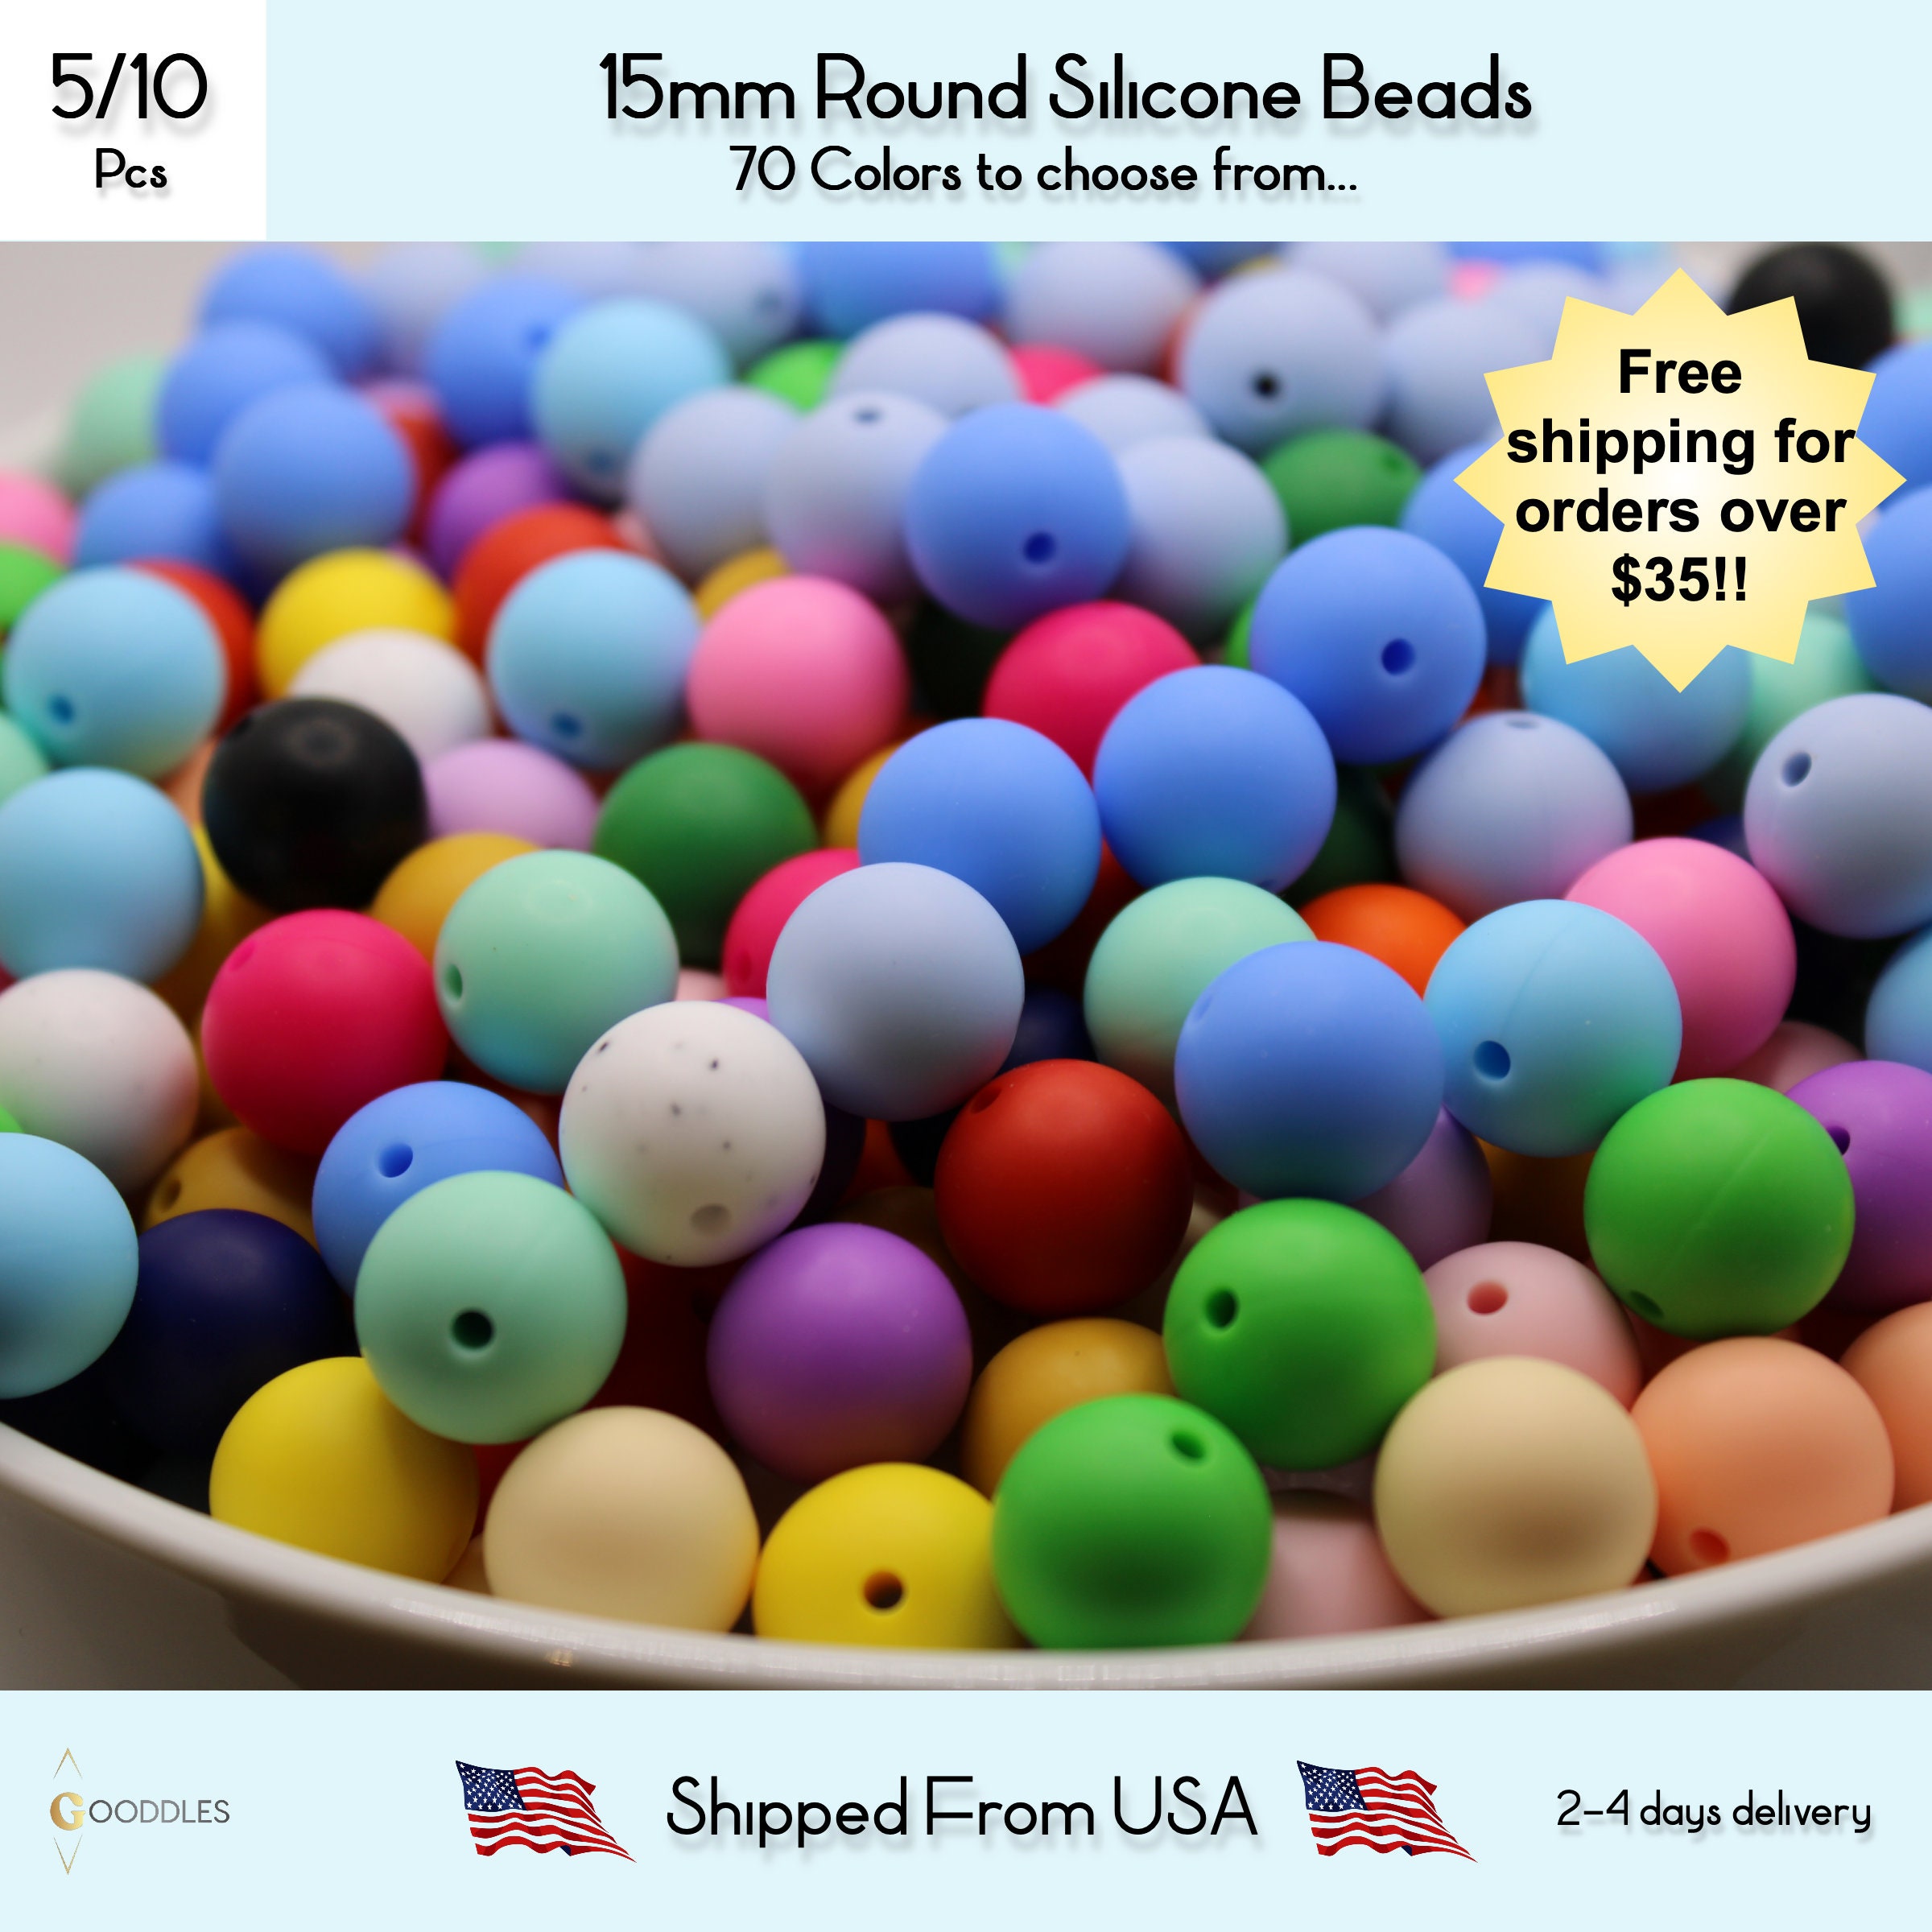 5pcs, 12mm Silicone Beads, Solid Color Round Silicone Beads for